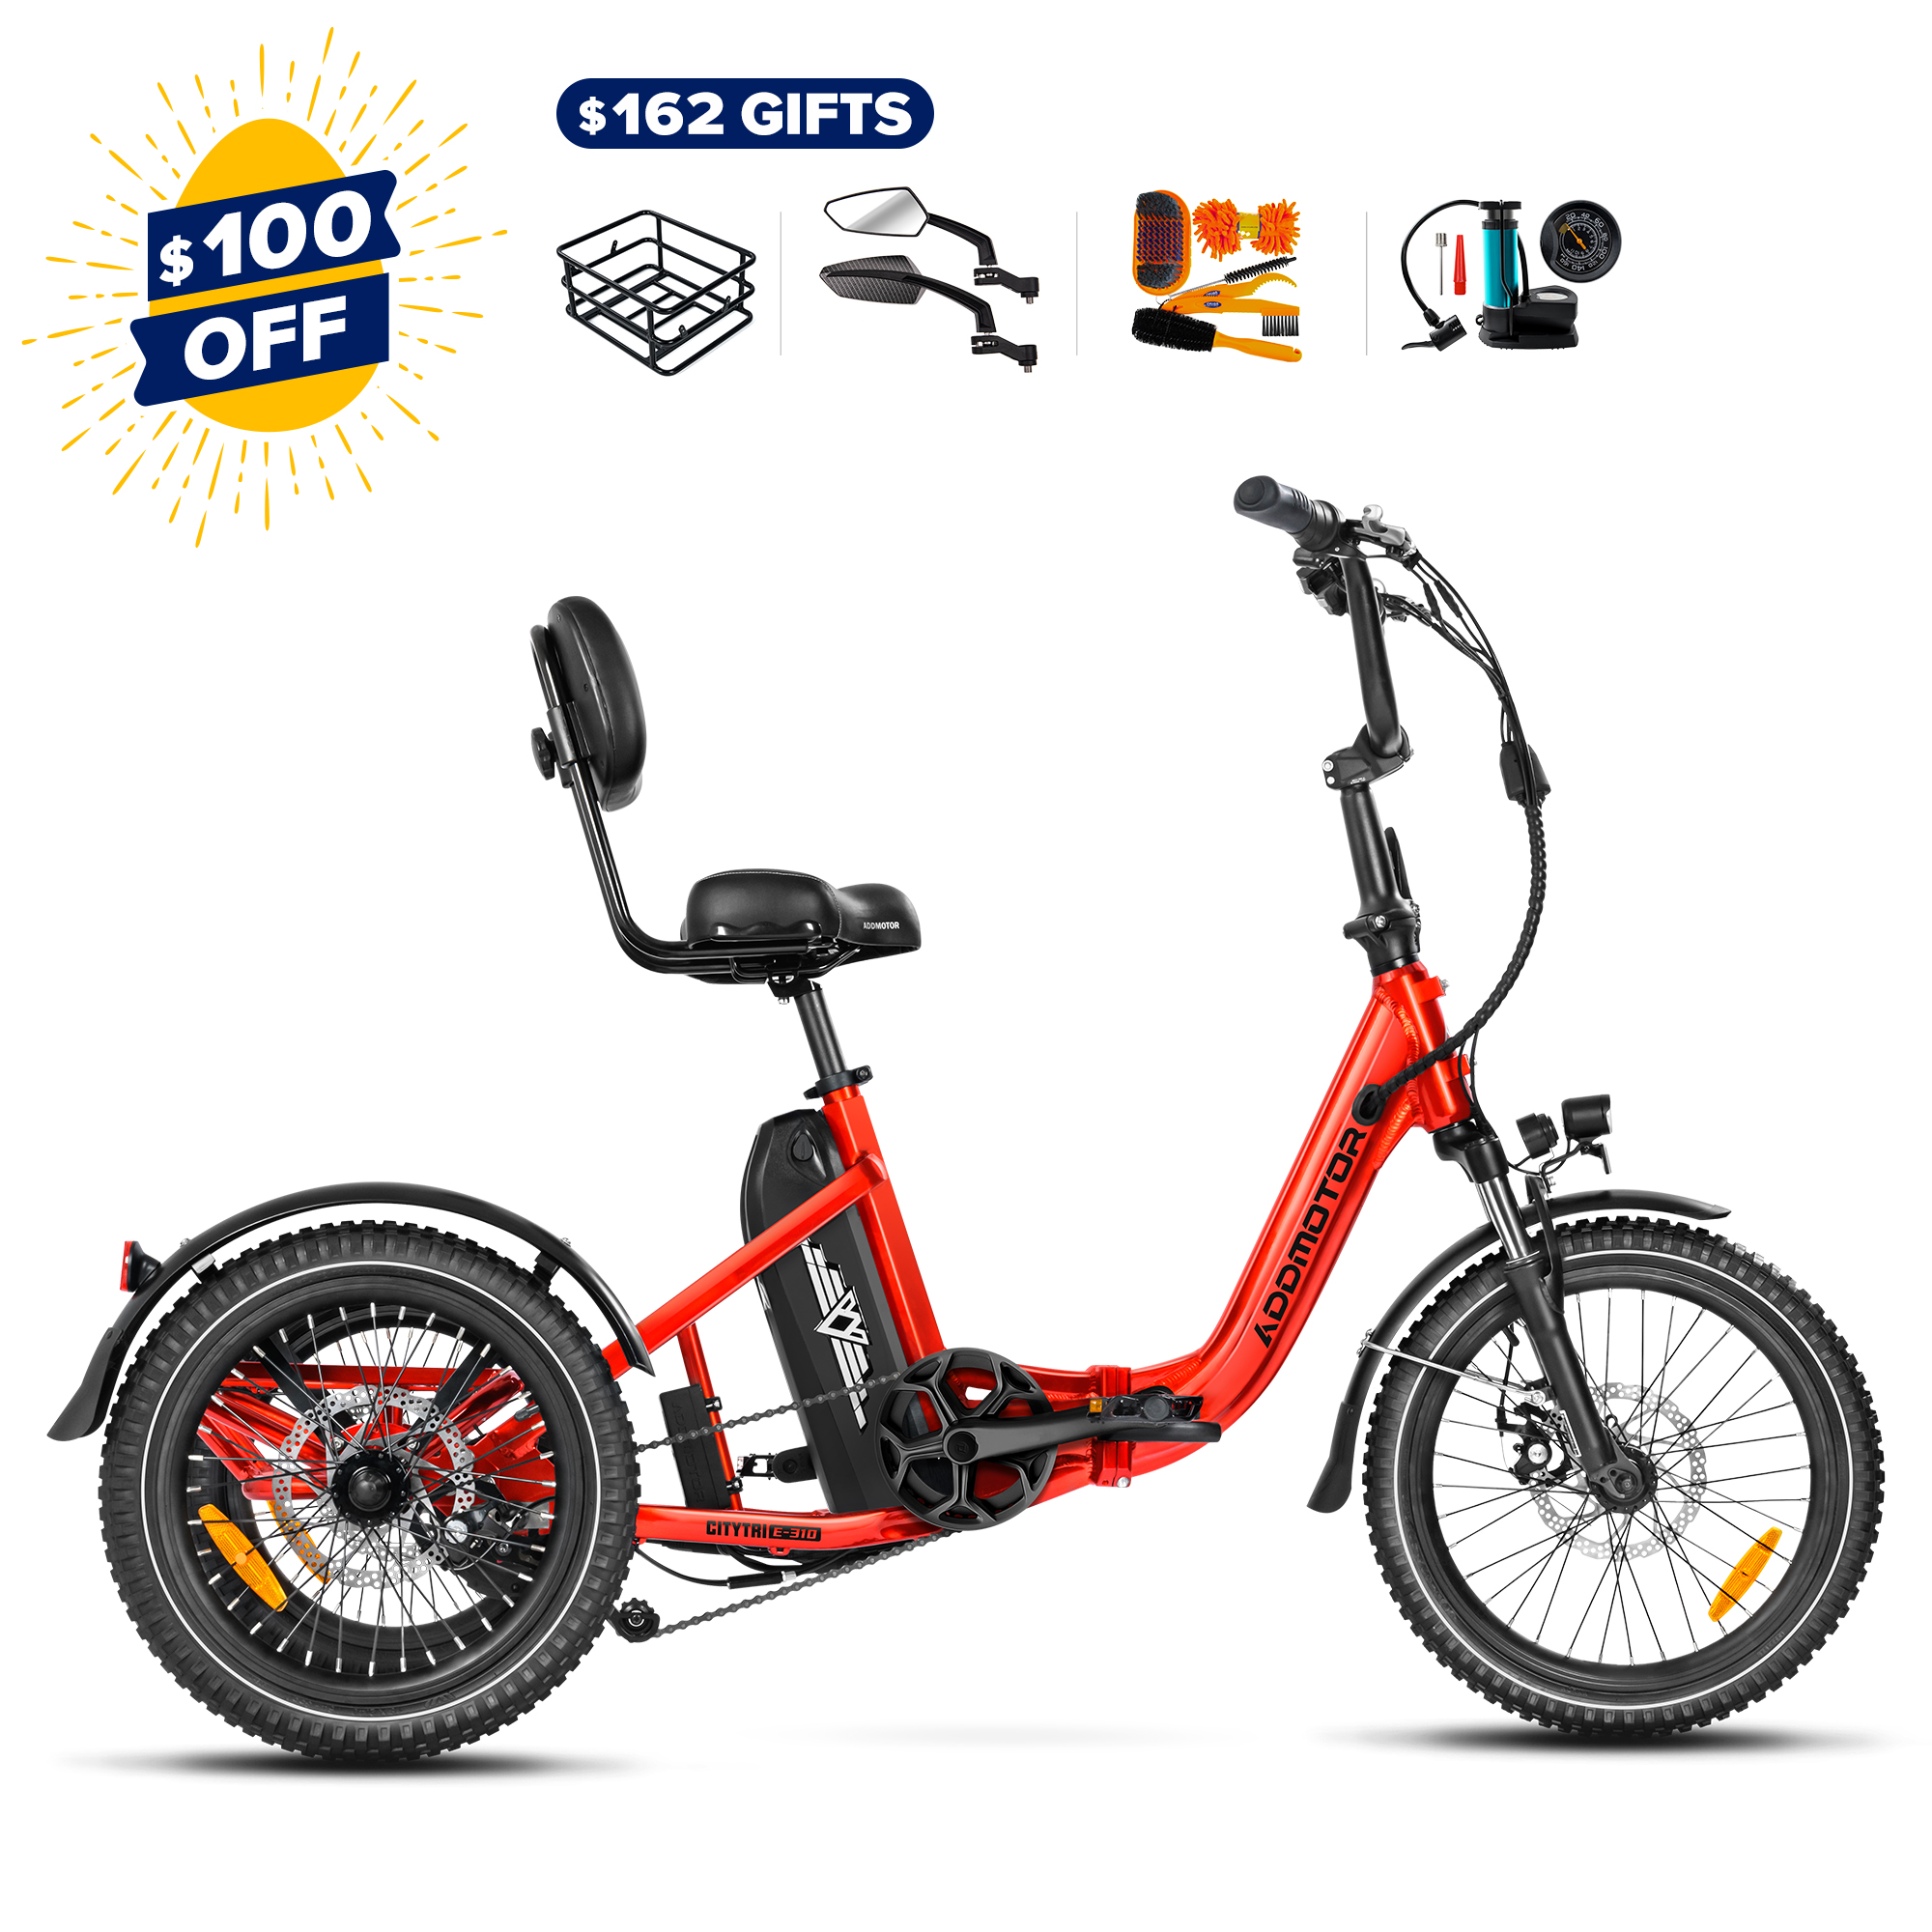 CITYTRI E-310 electric trike with $100 Off